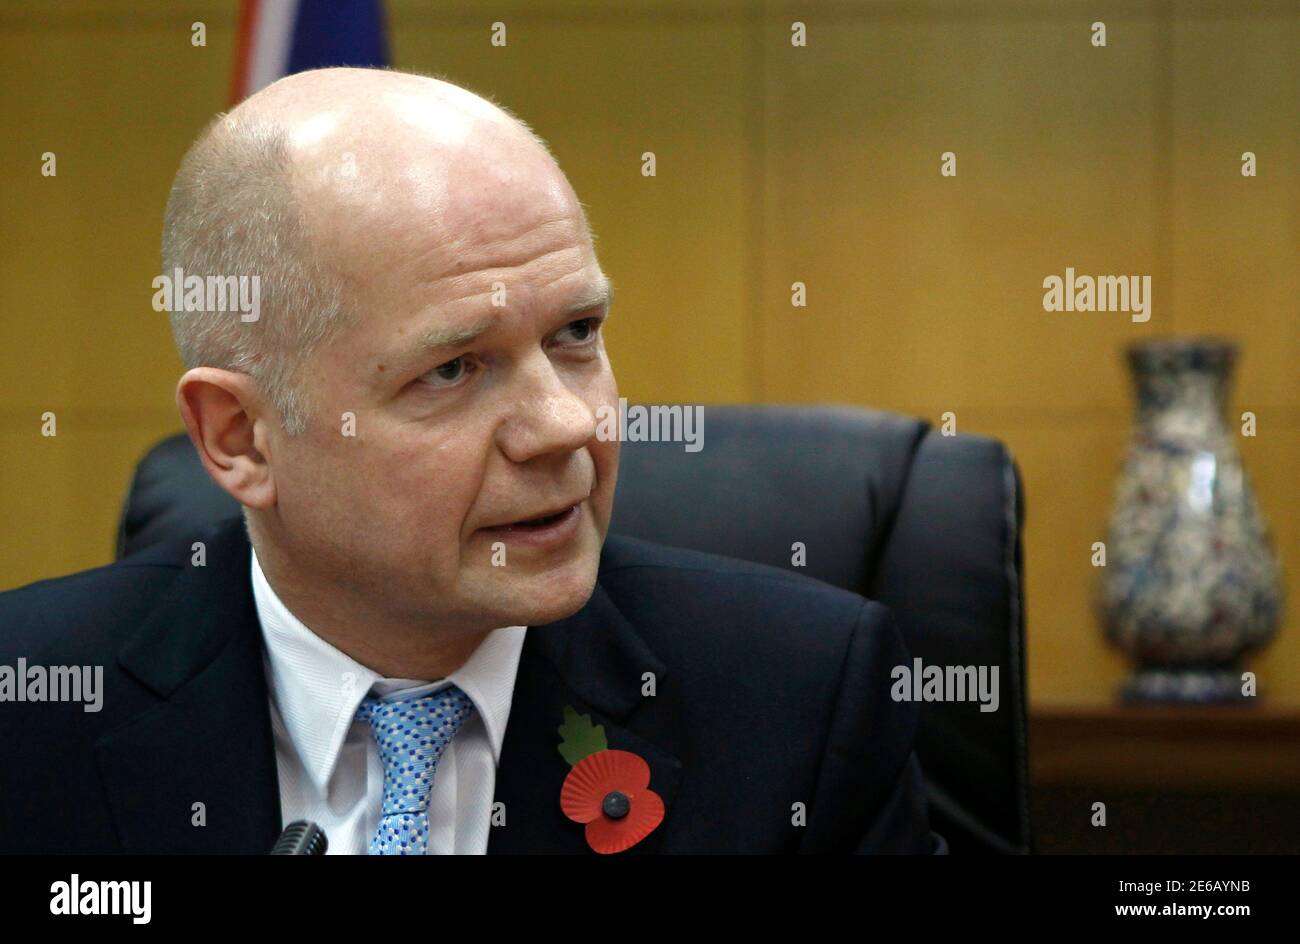 British Foreign Secretary William Hague speaks during a joint news conference with Palestinian Prime Minister Salam Fayyad (not pictured) in the West Bank city of Ramallah November 3, 2010. REUTERS/Ammar Awad (WEST BANK - Tags: POLITICS) Stock Photo